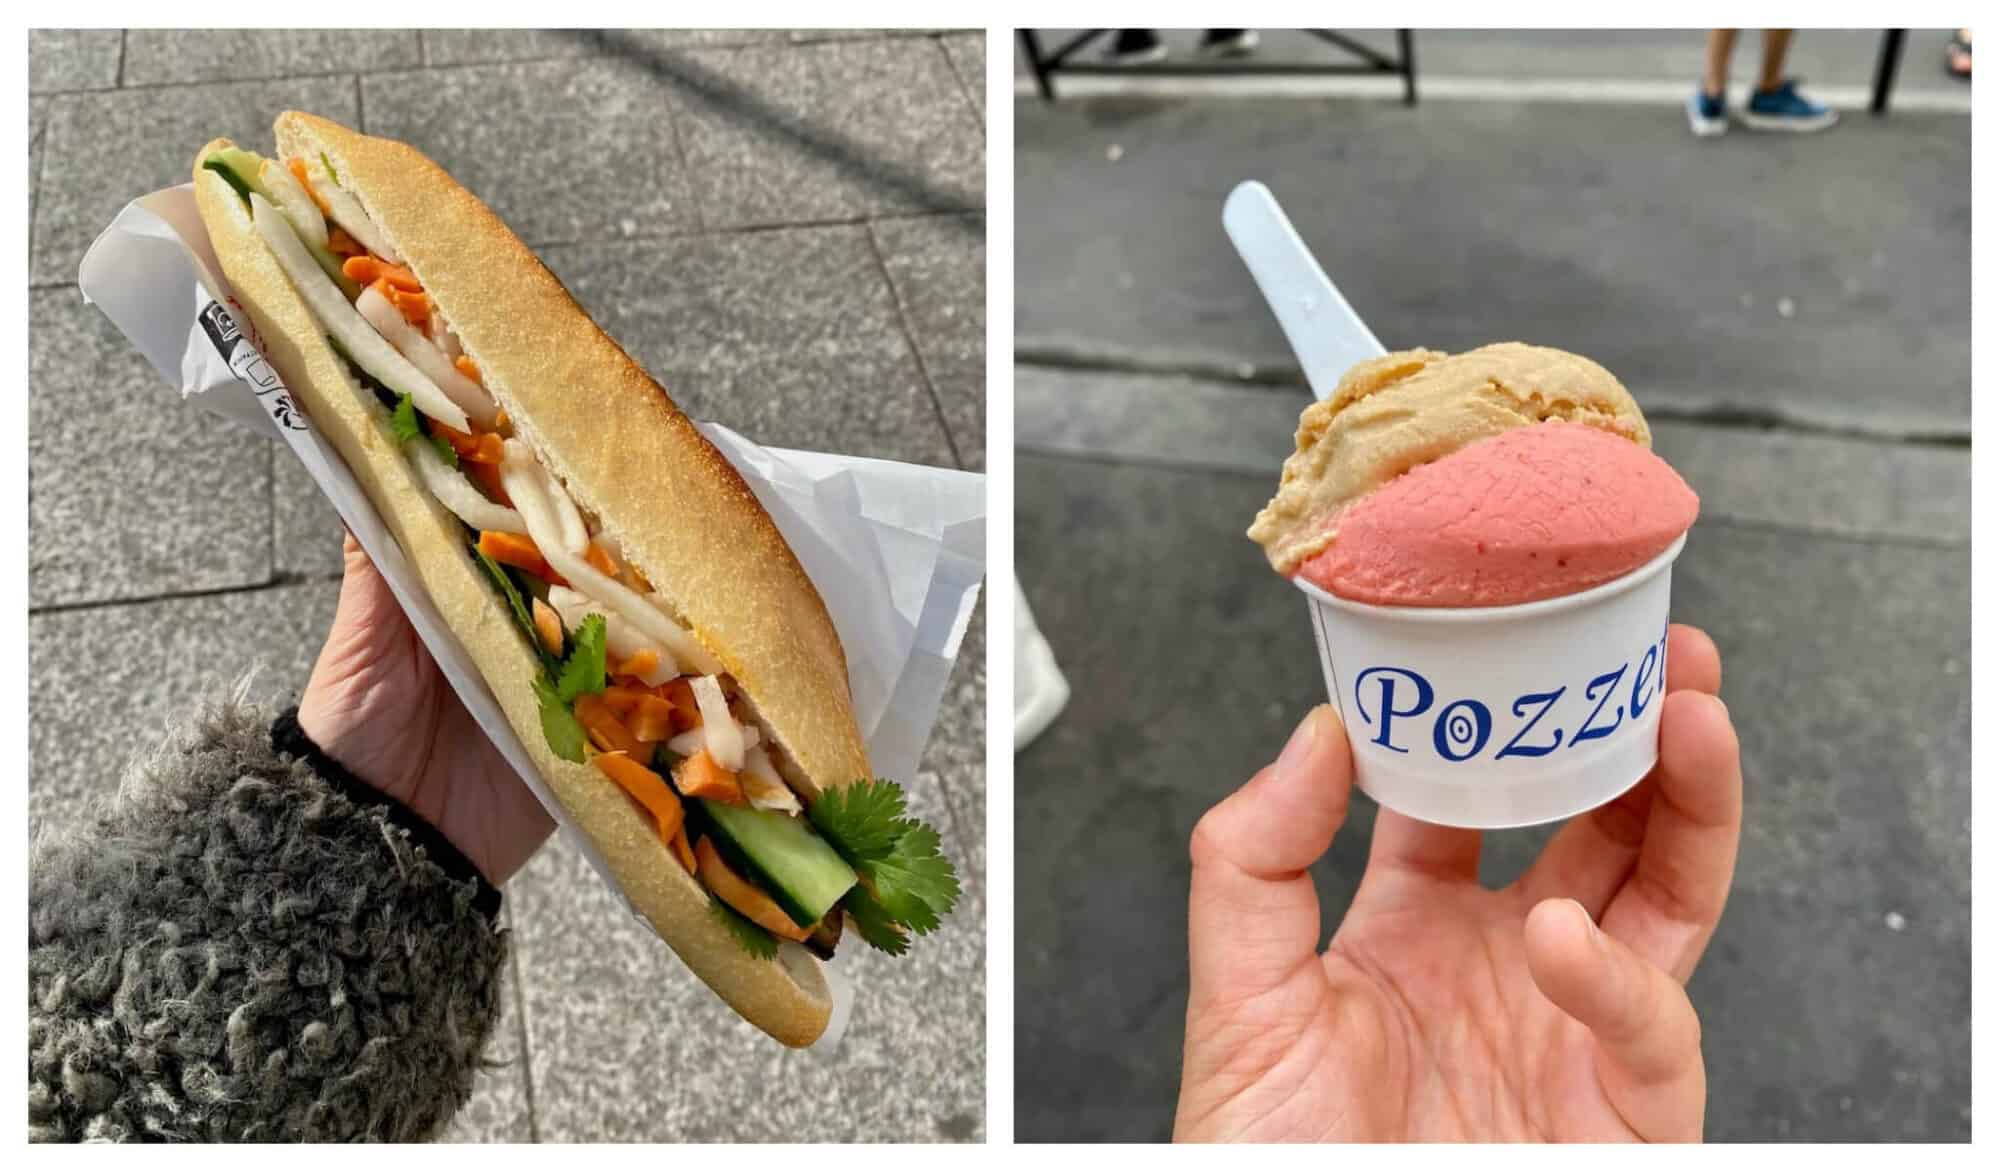 Left: A hand holding a foot long Banh Mi from Nonette; Right: A hand holding a small cup of gelato from Pozetto Paris.